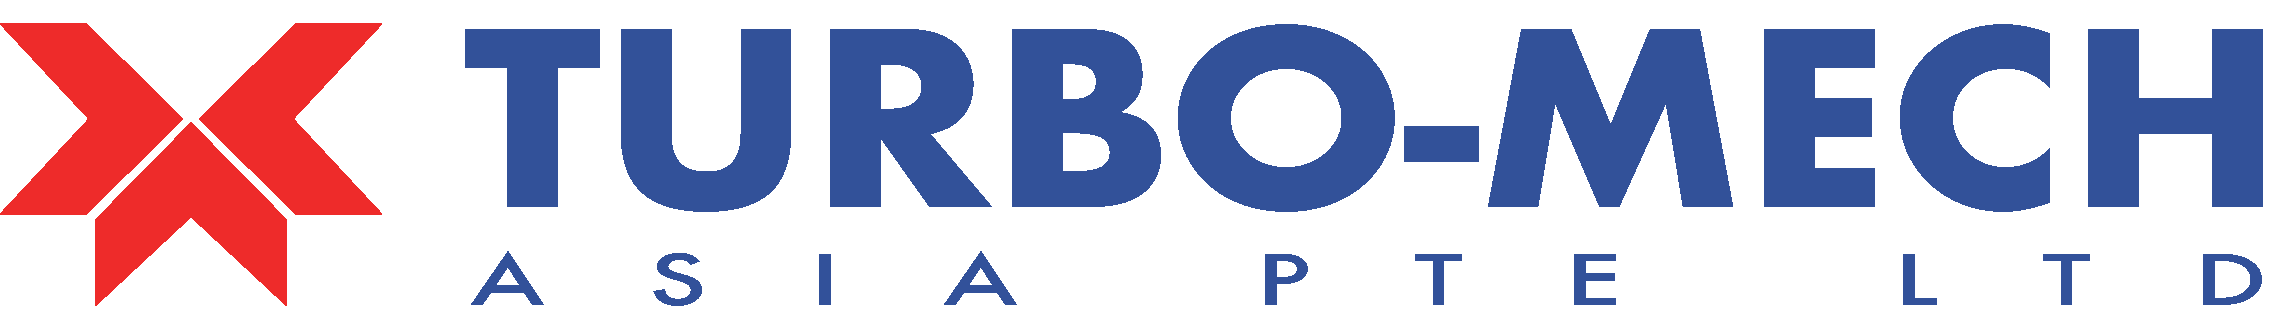 This logo of Turbo Mech features three red arrows pointed inwards and the words ‘TURBO-MECH ASIA PTE LTD’ in dark blue sans-serif typeface.